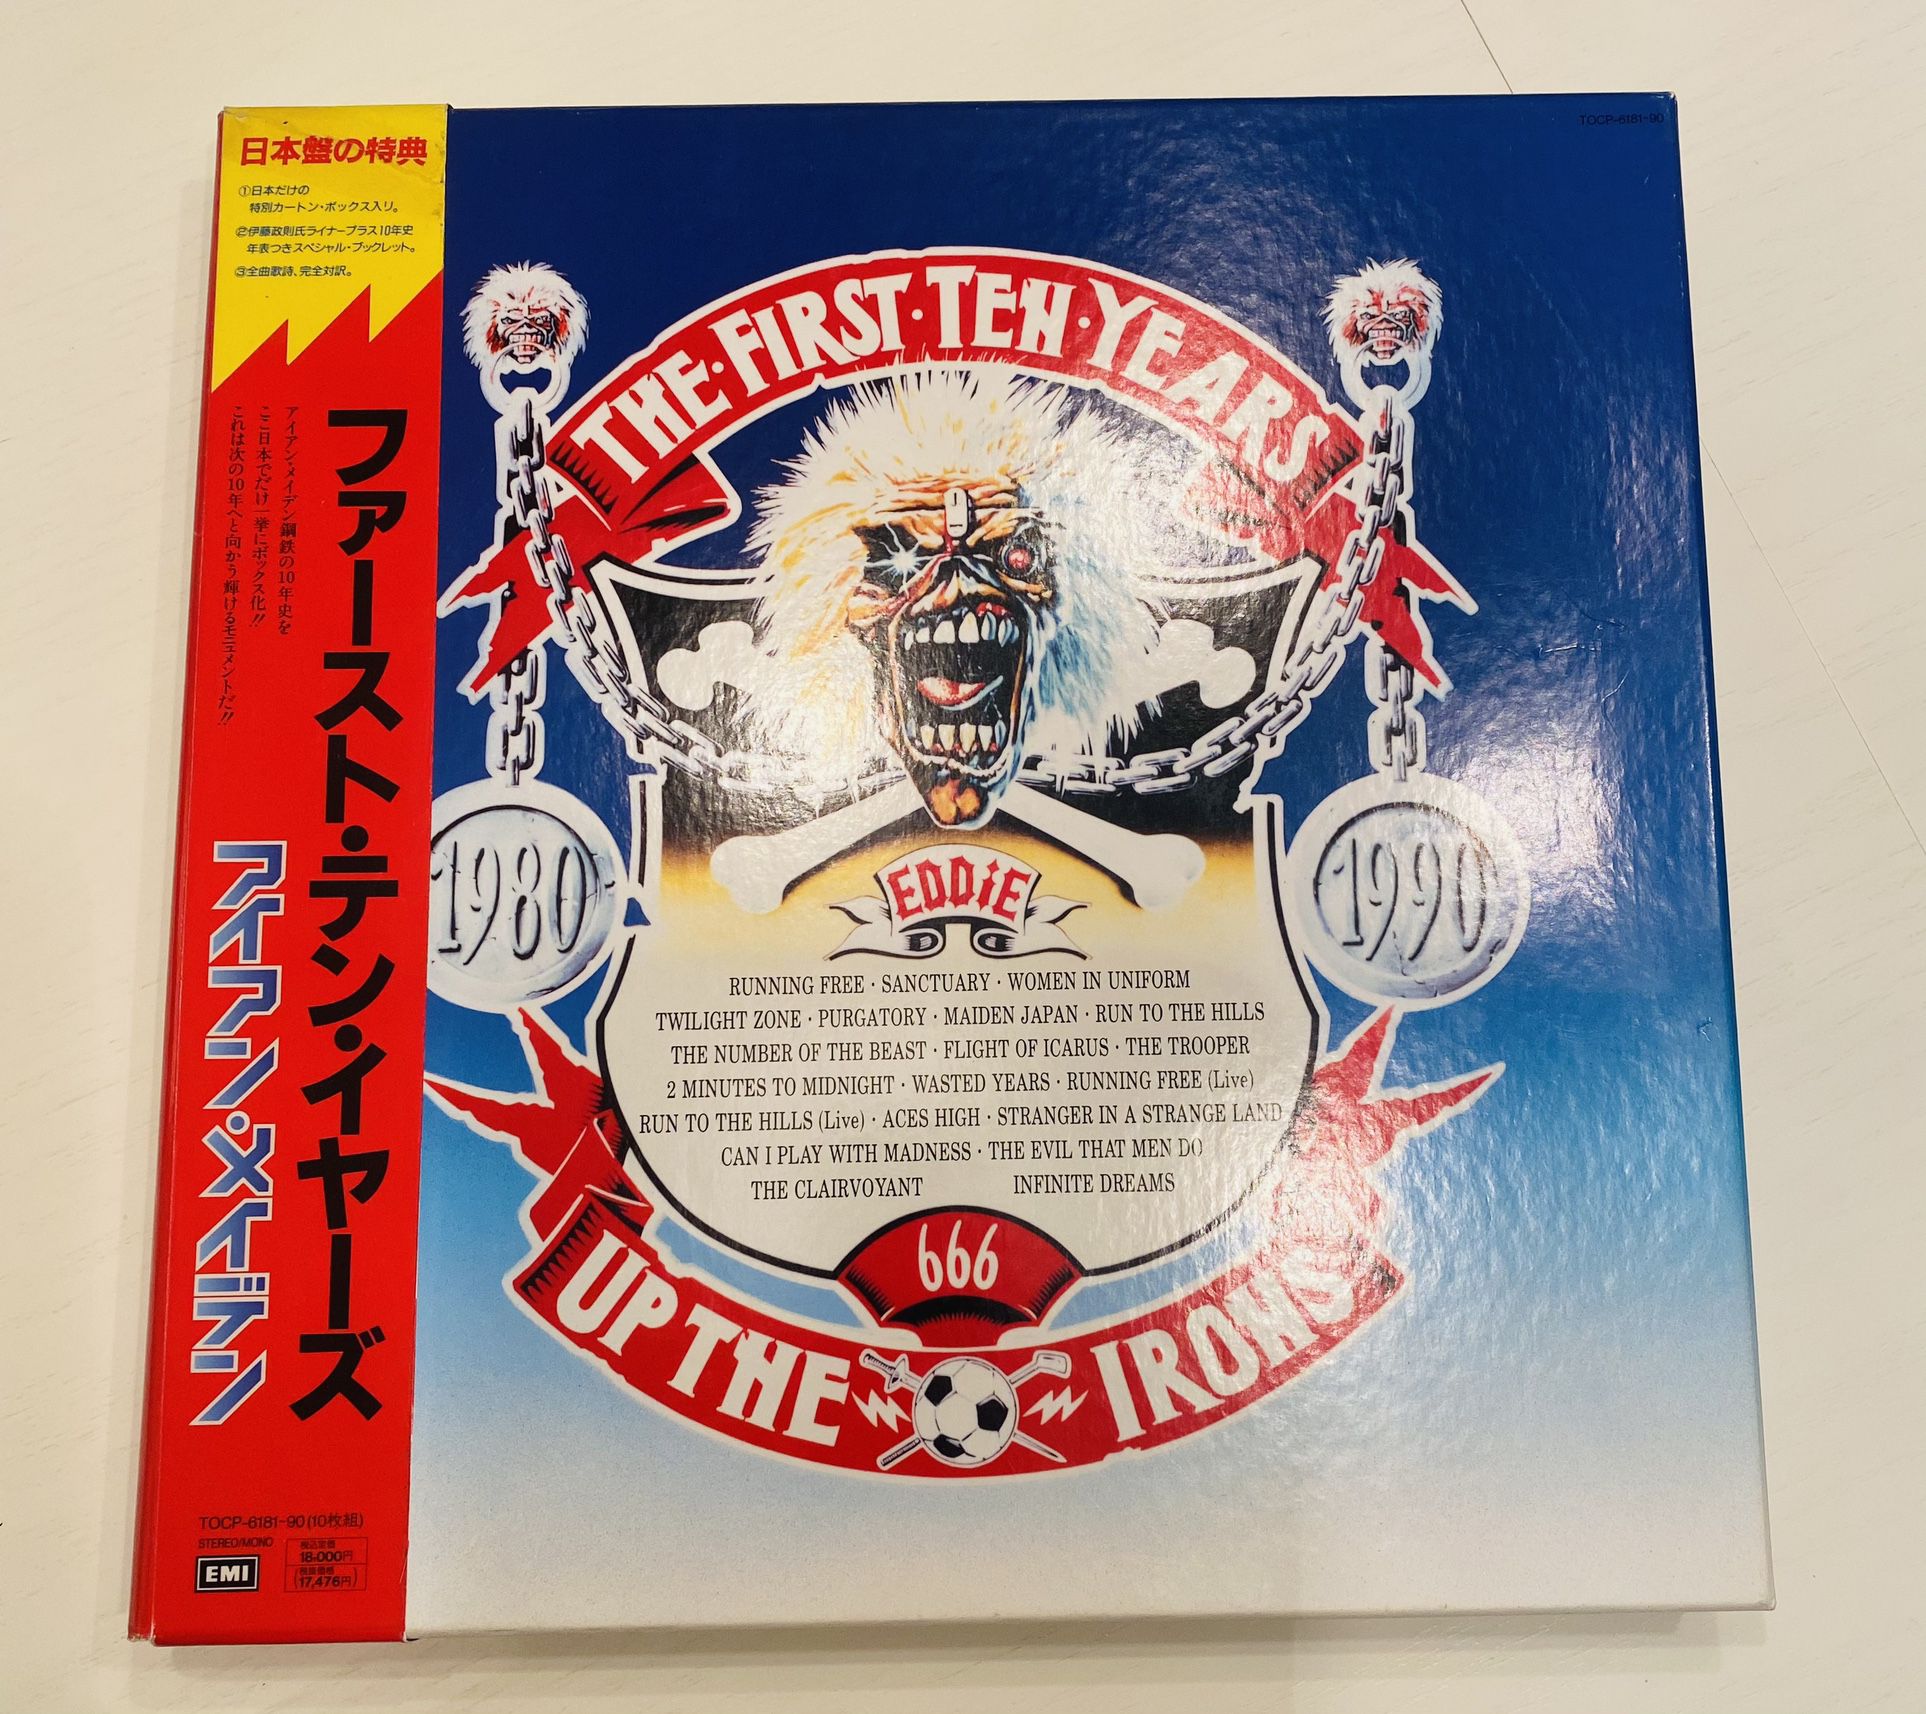 Iron Maiden - The First 10 Years Box Set / Japanese Pressing 